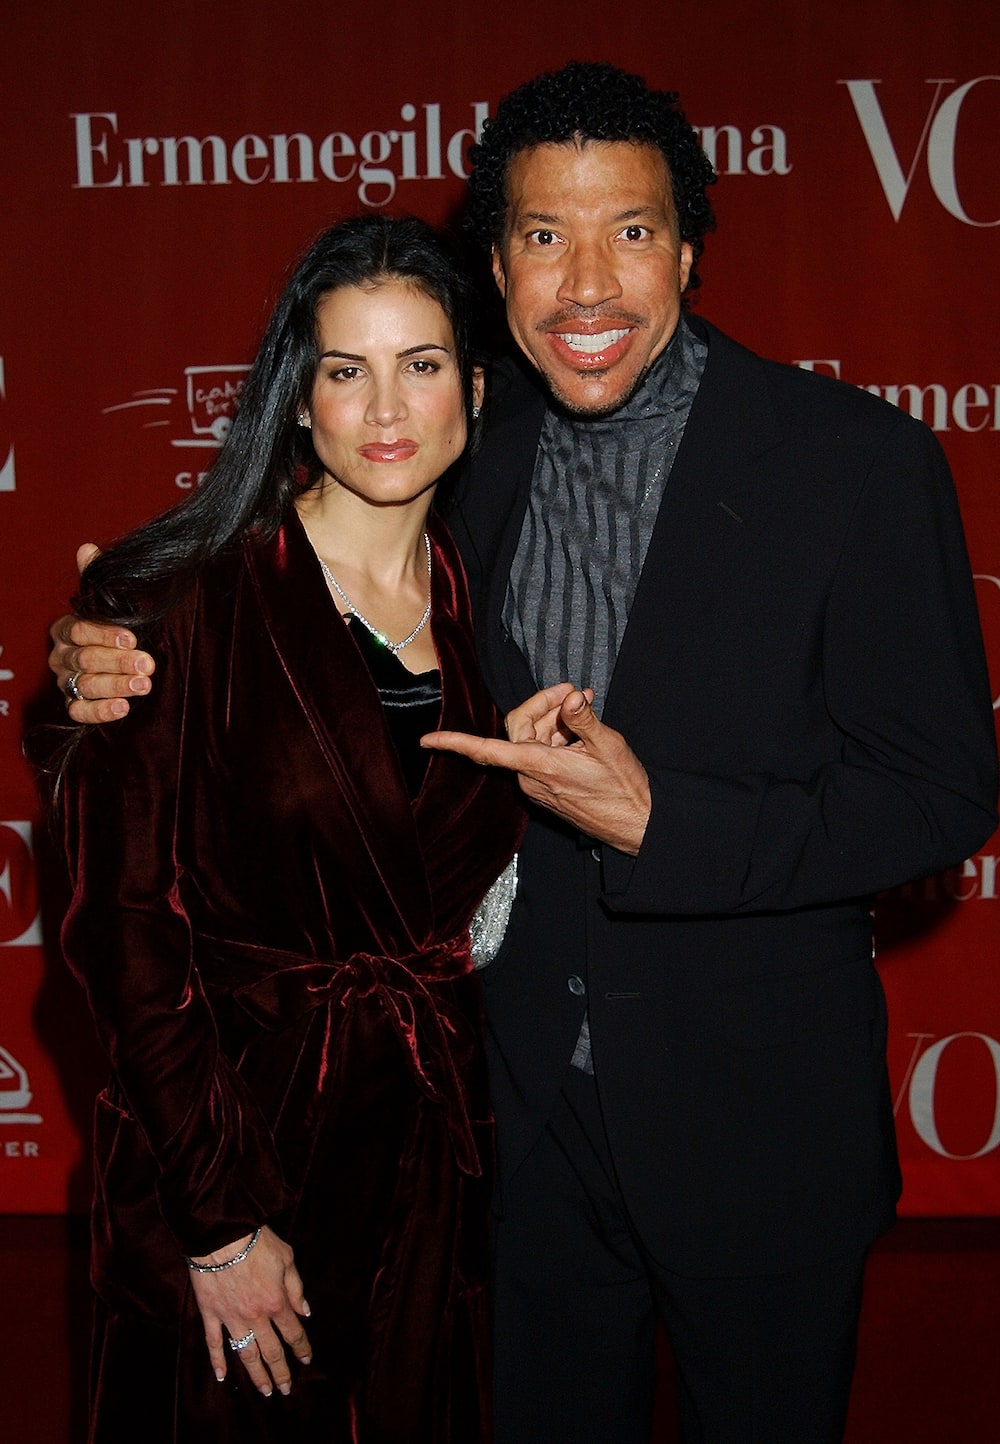 What happened to Lionel Richie's marriage?